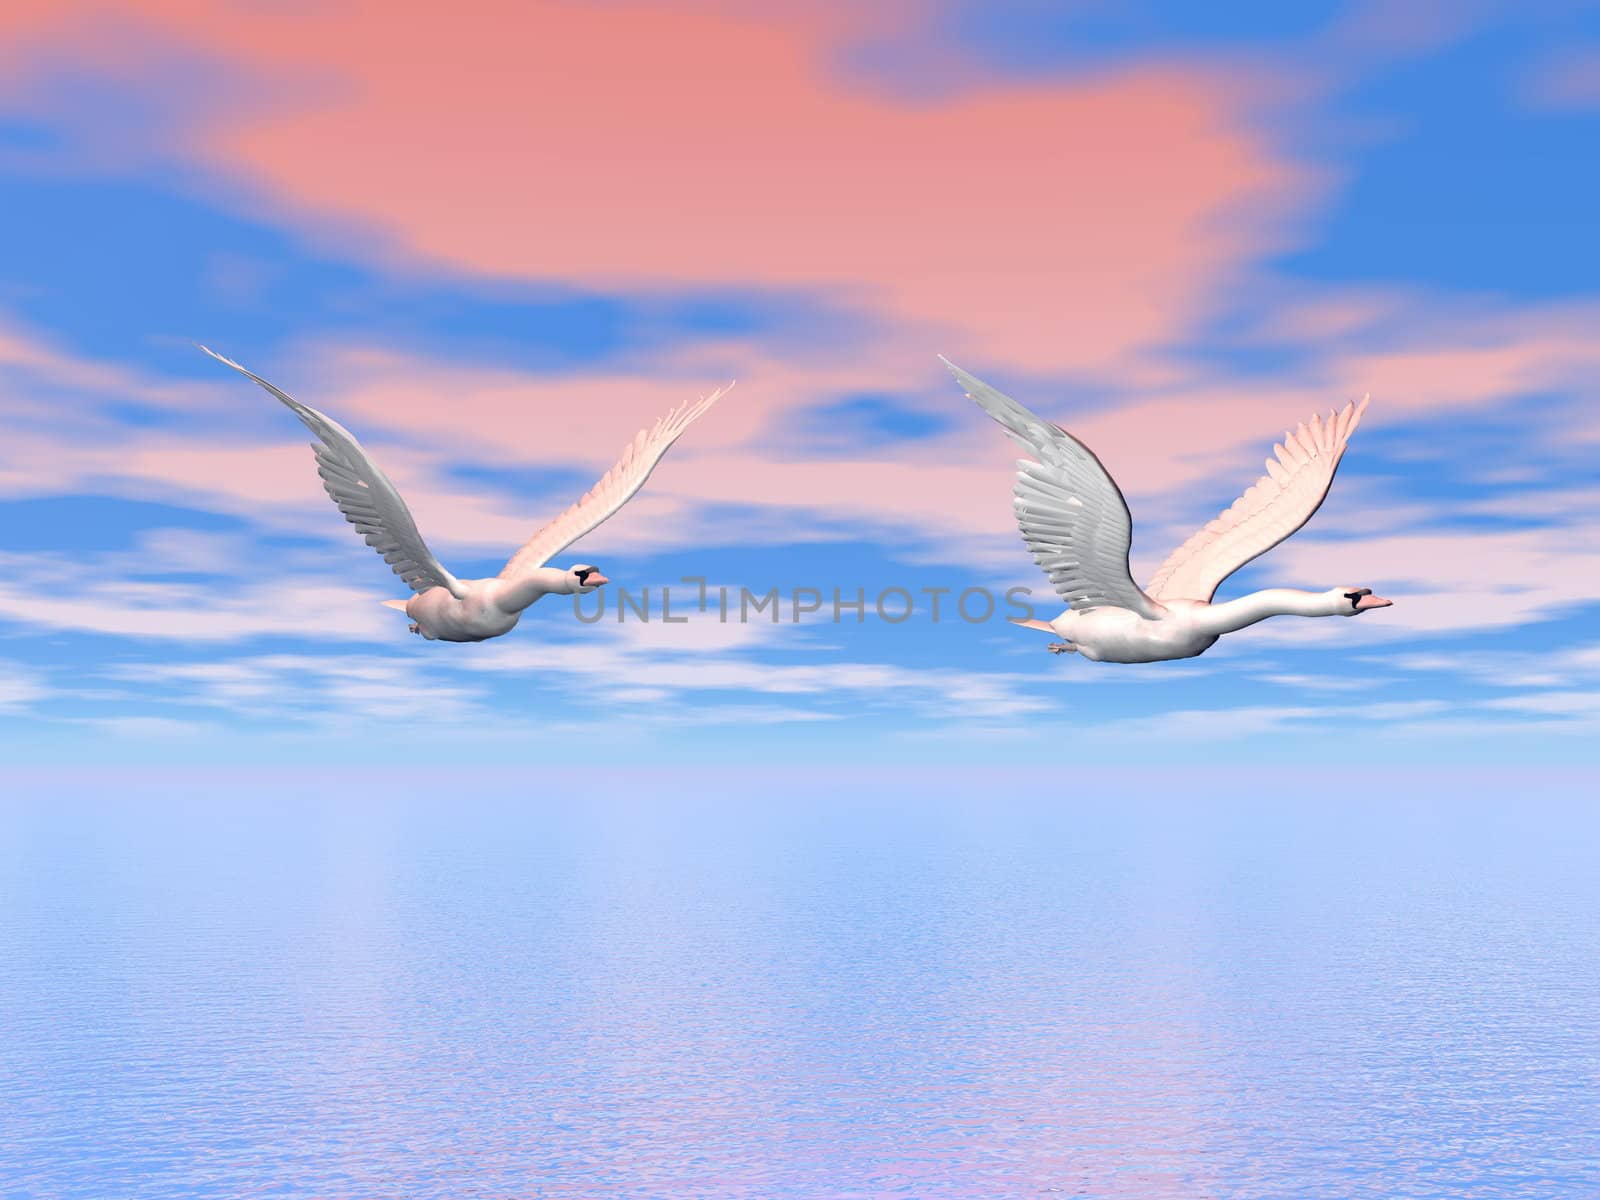 Two beautiful swans flying in colorful pink and blue sky upon the ocean